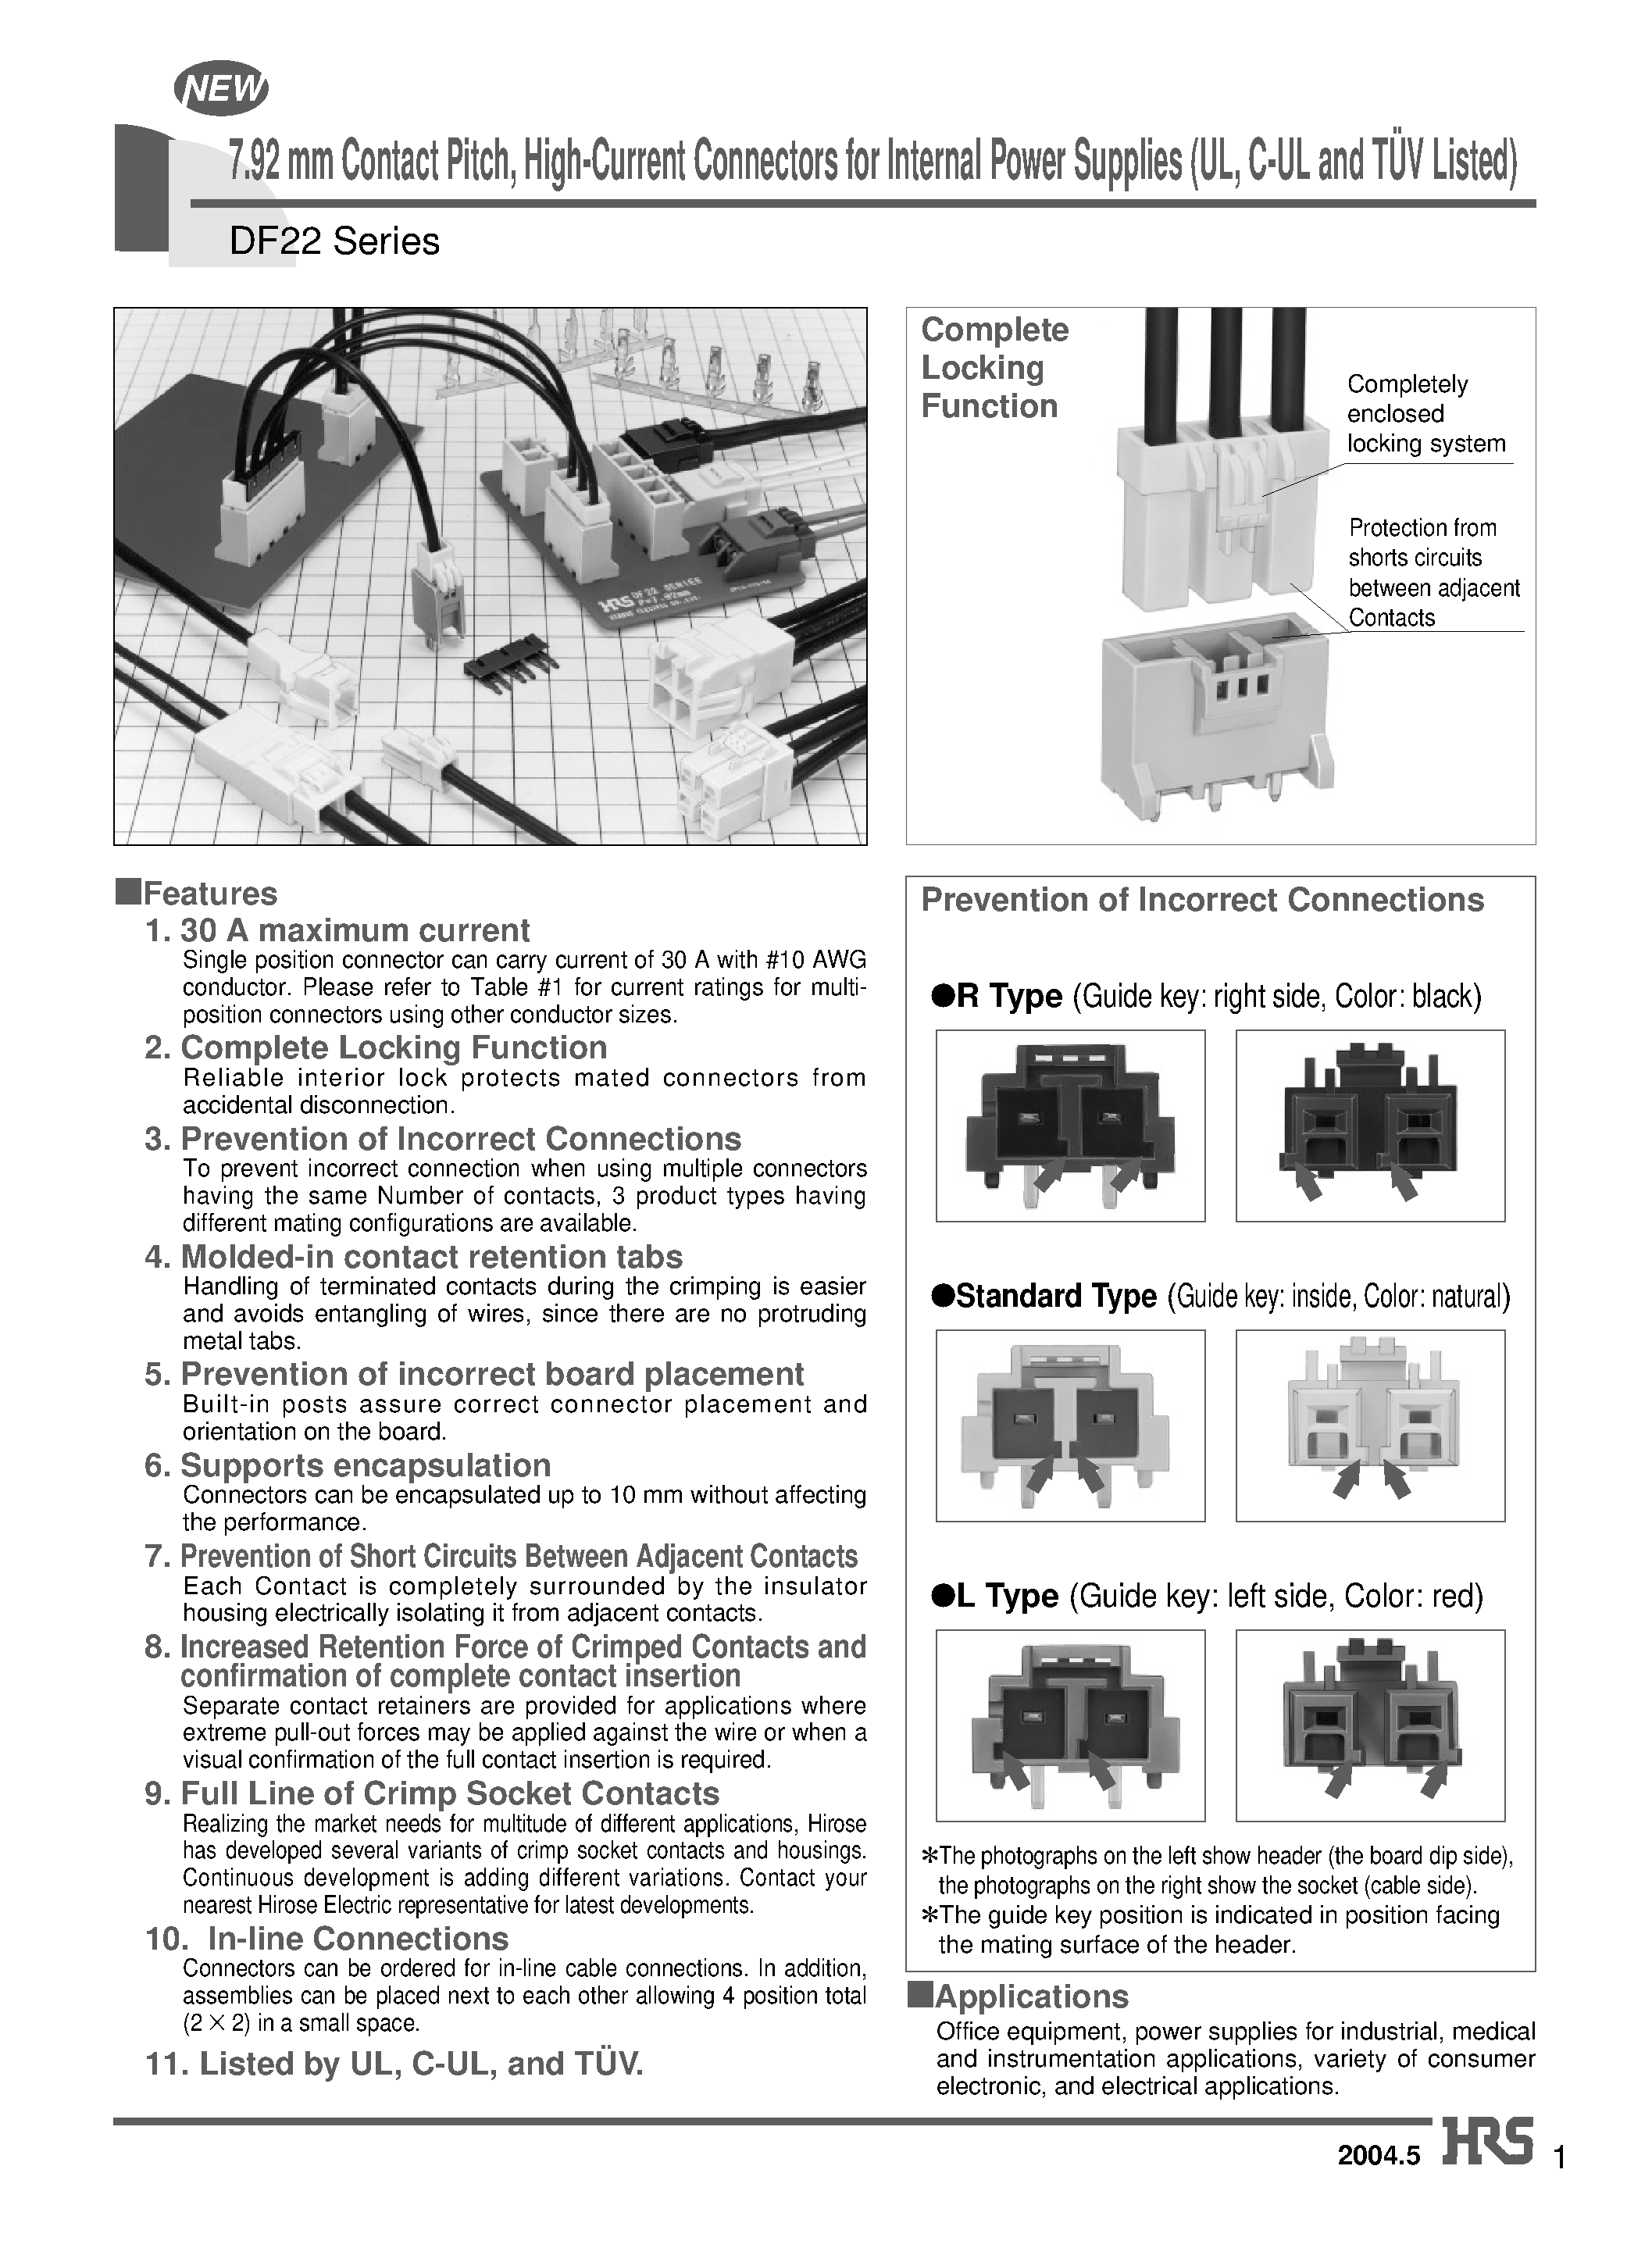 Datasheet DF22A-1DEP-7.92DSA - 7.92 mm Contact Pitch/ High-Current Connectors for Internal Power Supplies (UL/ C-UL and TUV Listed) page 1